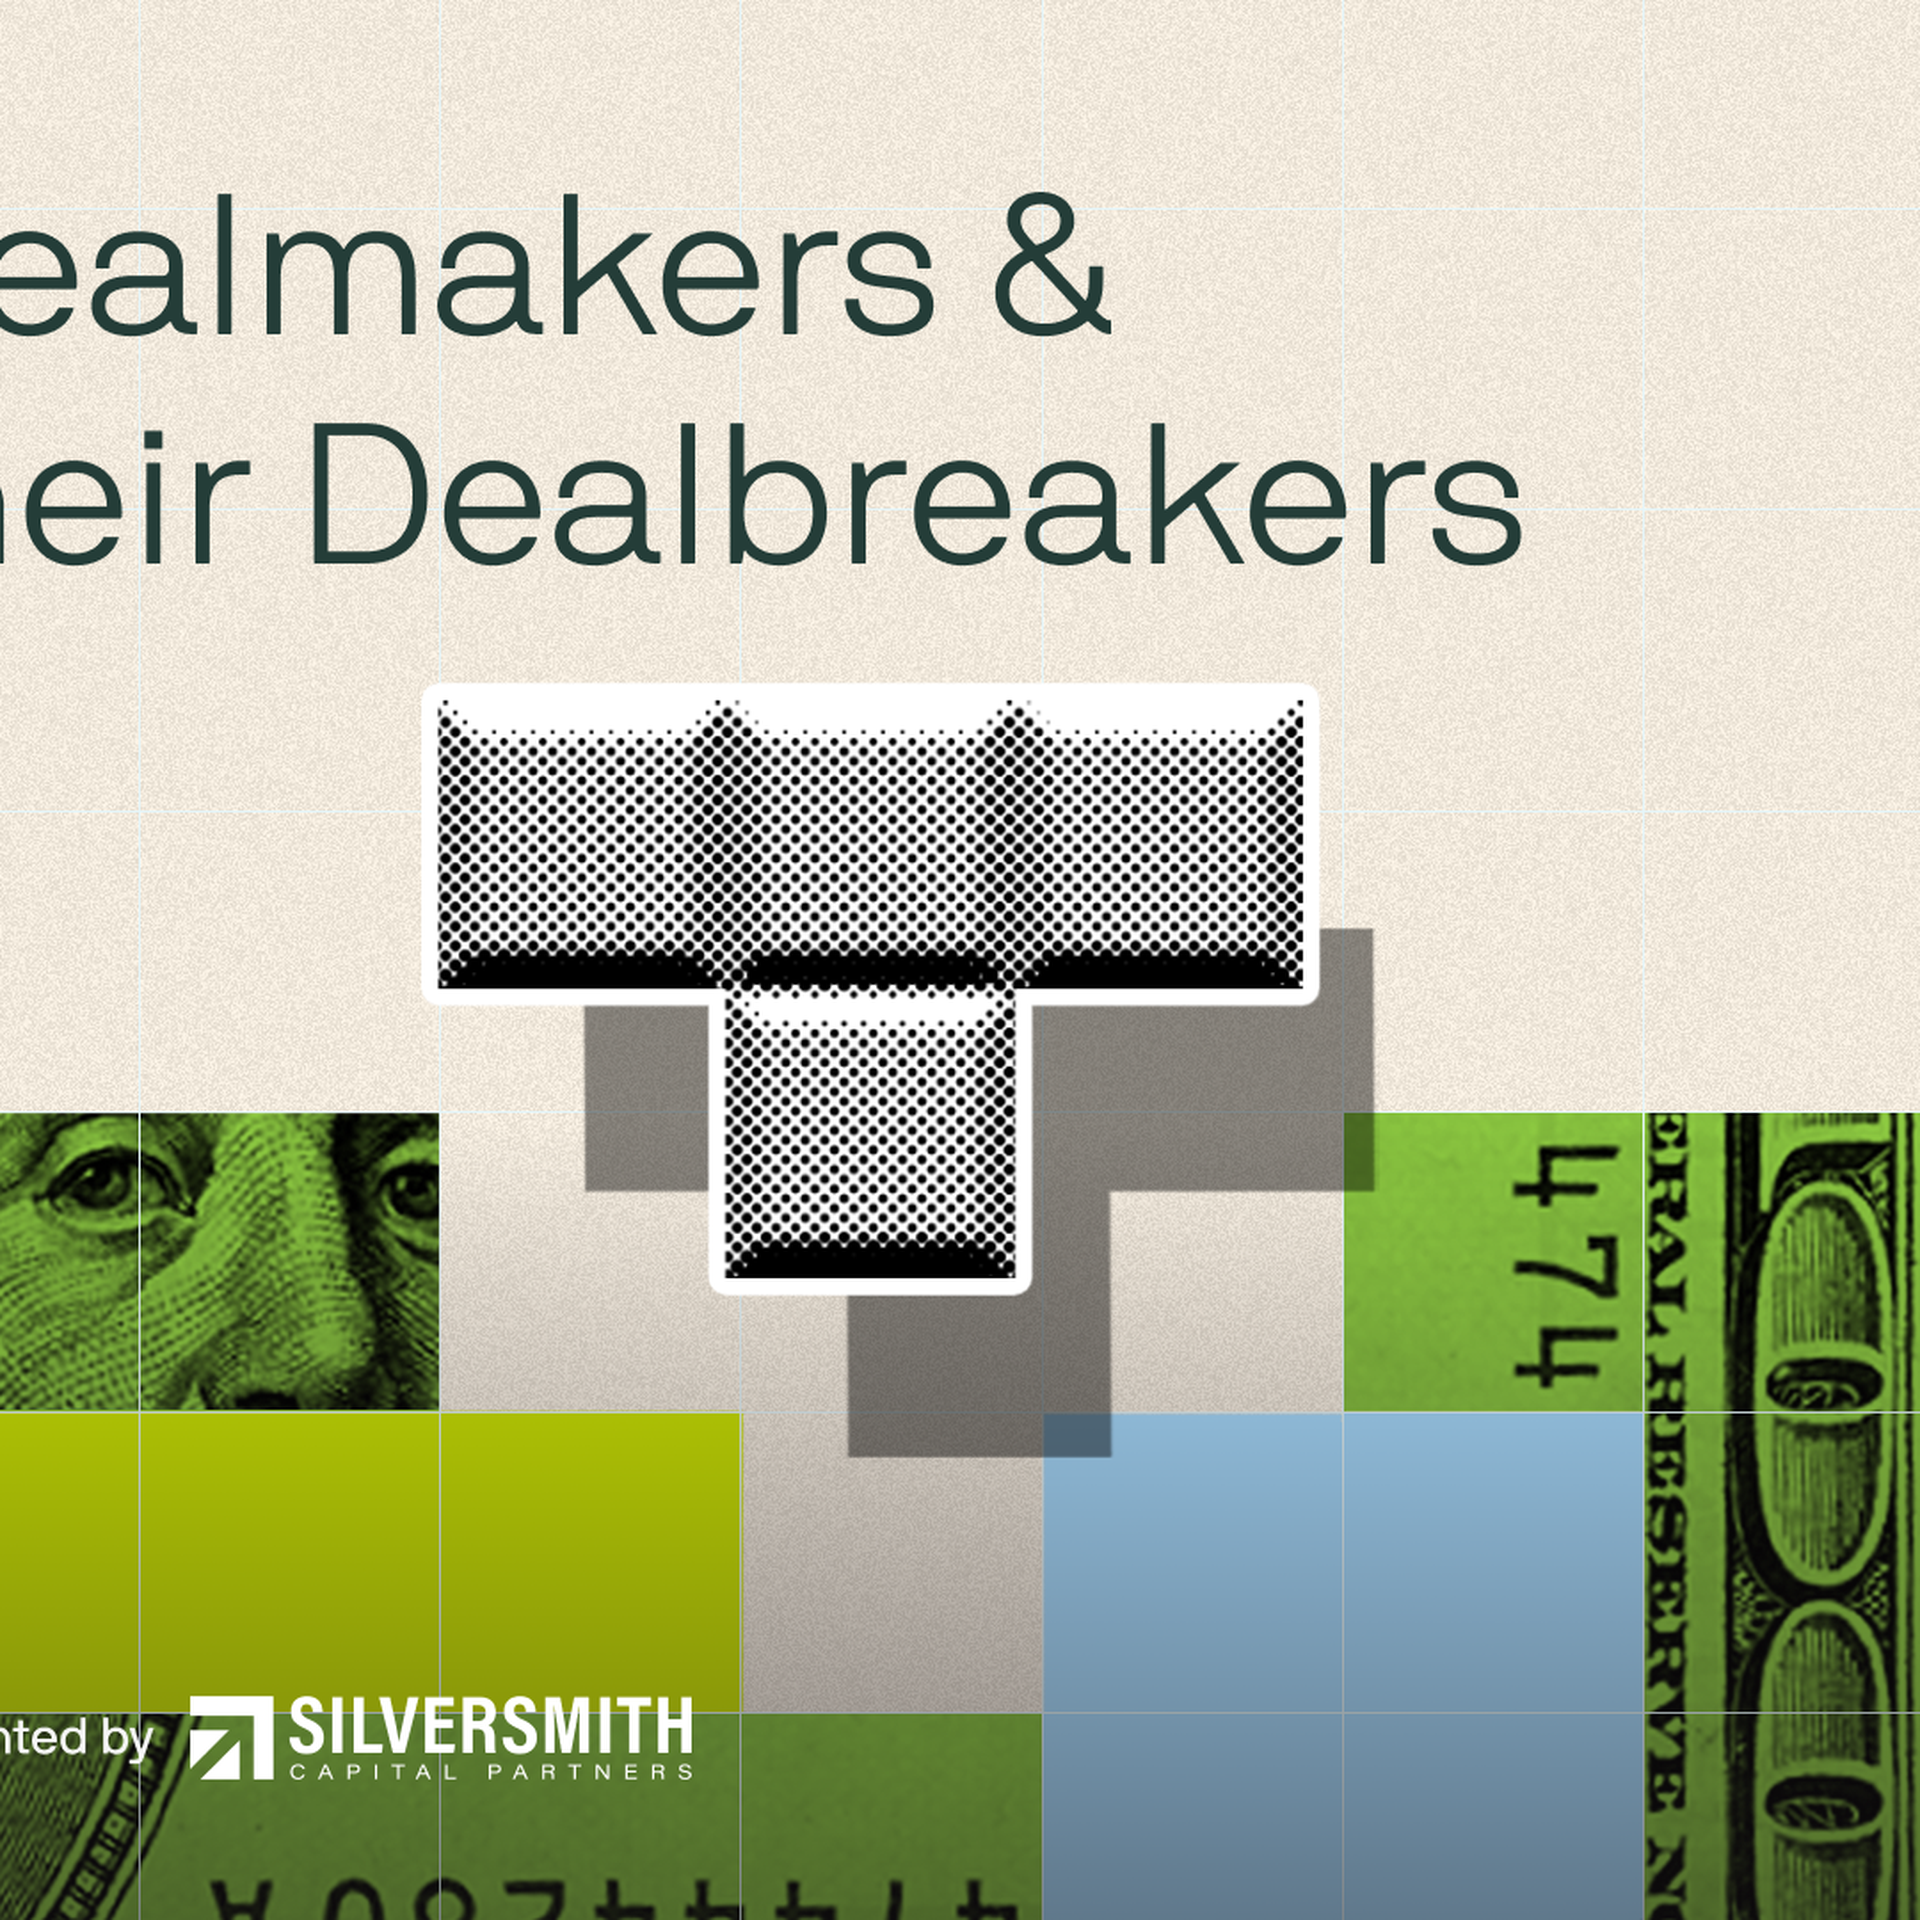 Axios event promotional image reads: Dealmakers & their Dealbreakers